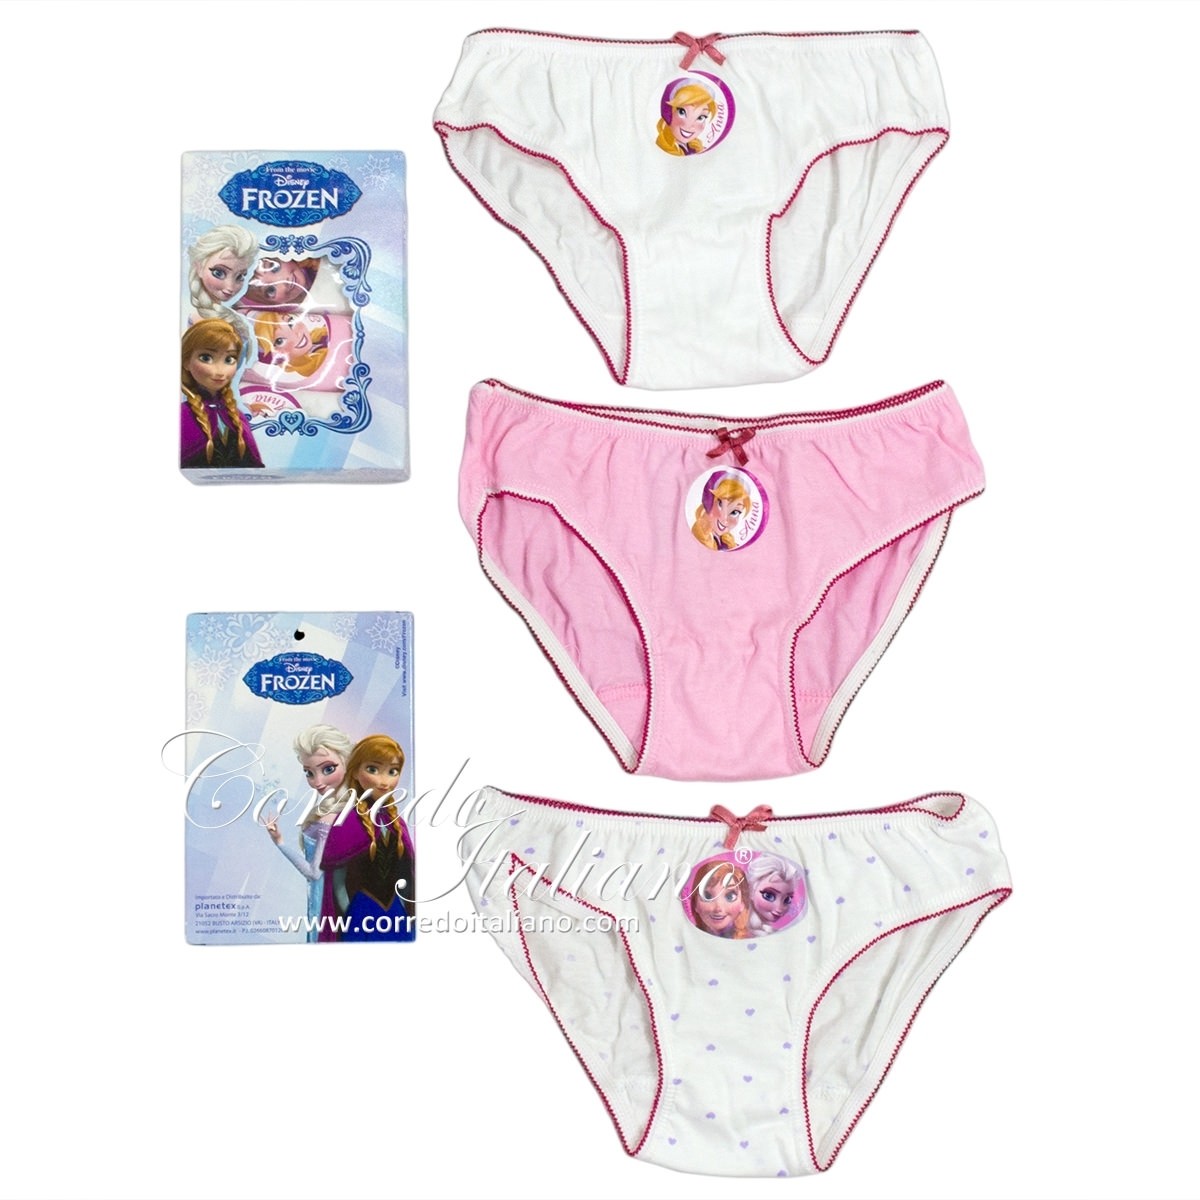  Disney Frozen Girls Briefs Panty Multipacks,  Multicolor/Assorted, 7pk, 2-3T: Clothing, Shoes & Jewelry